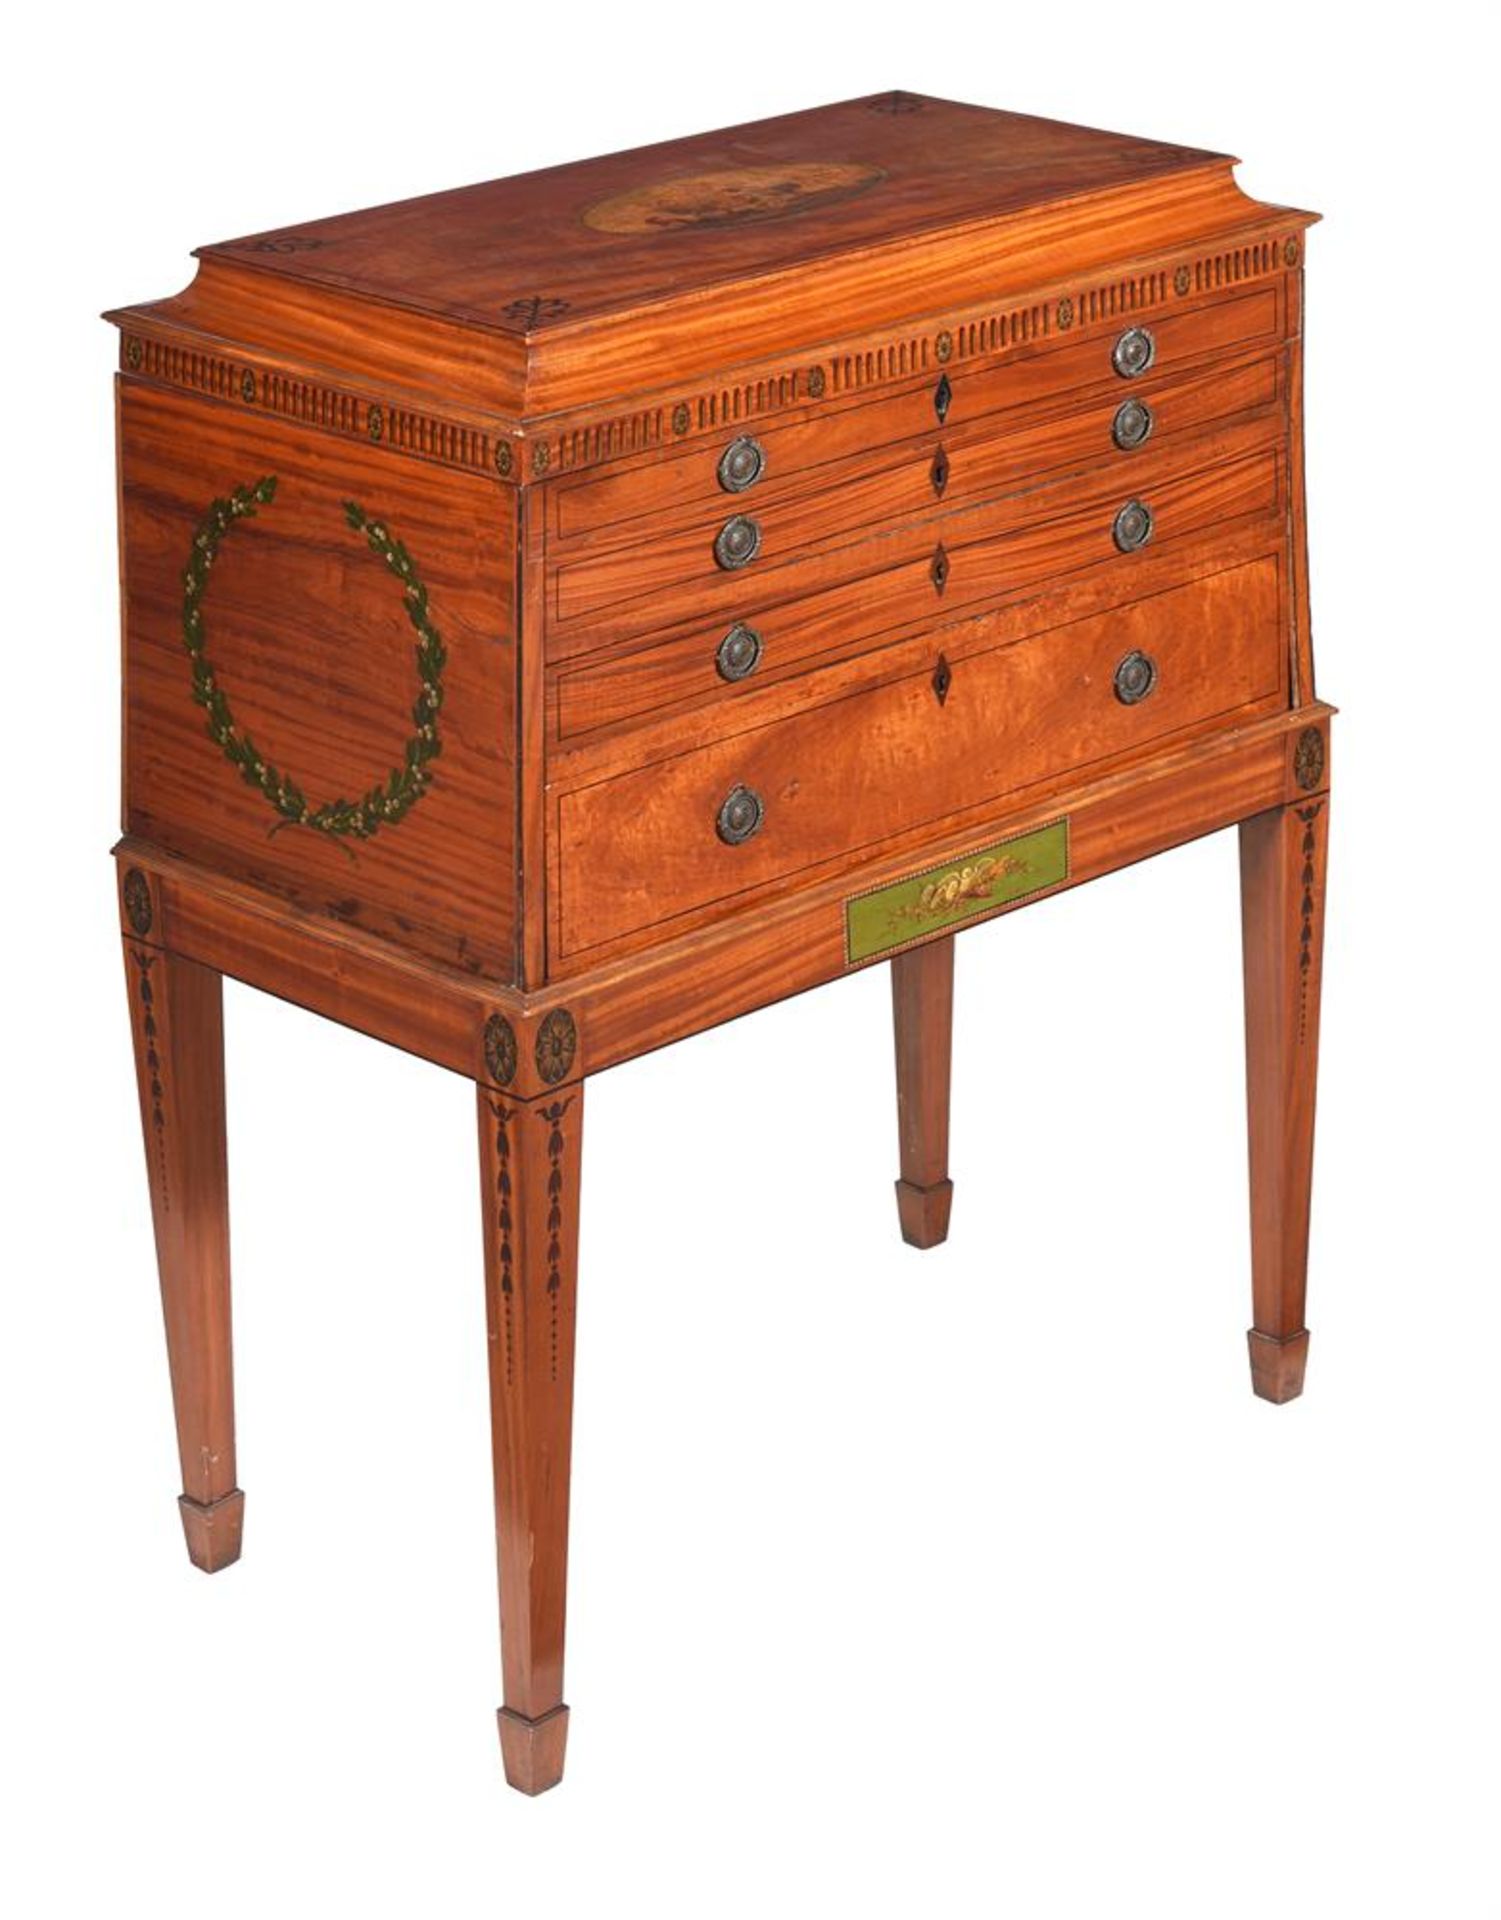 A SATINWOOD AND POLYCHROME PAINTED CHEST ON STAND